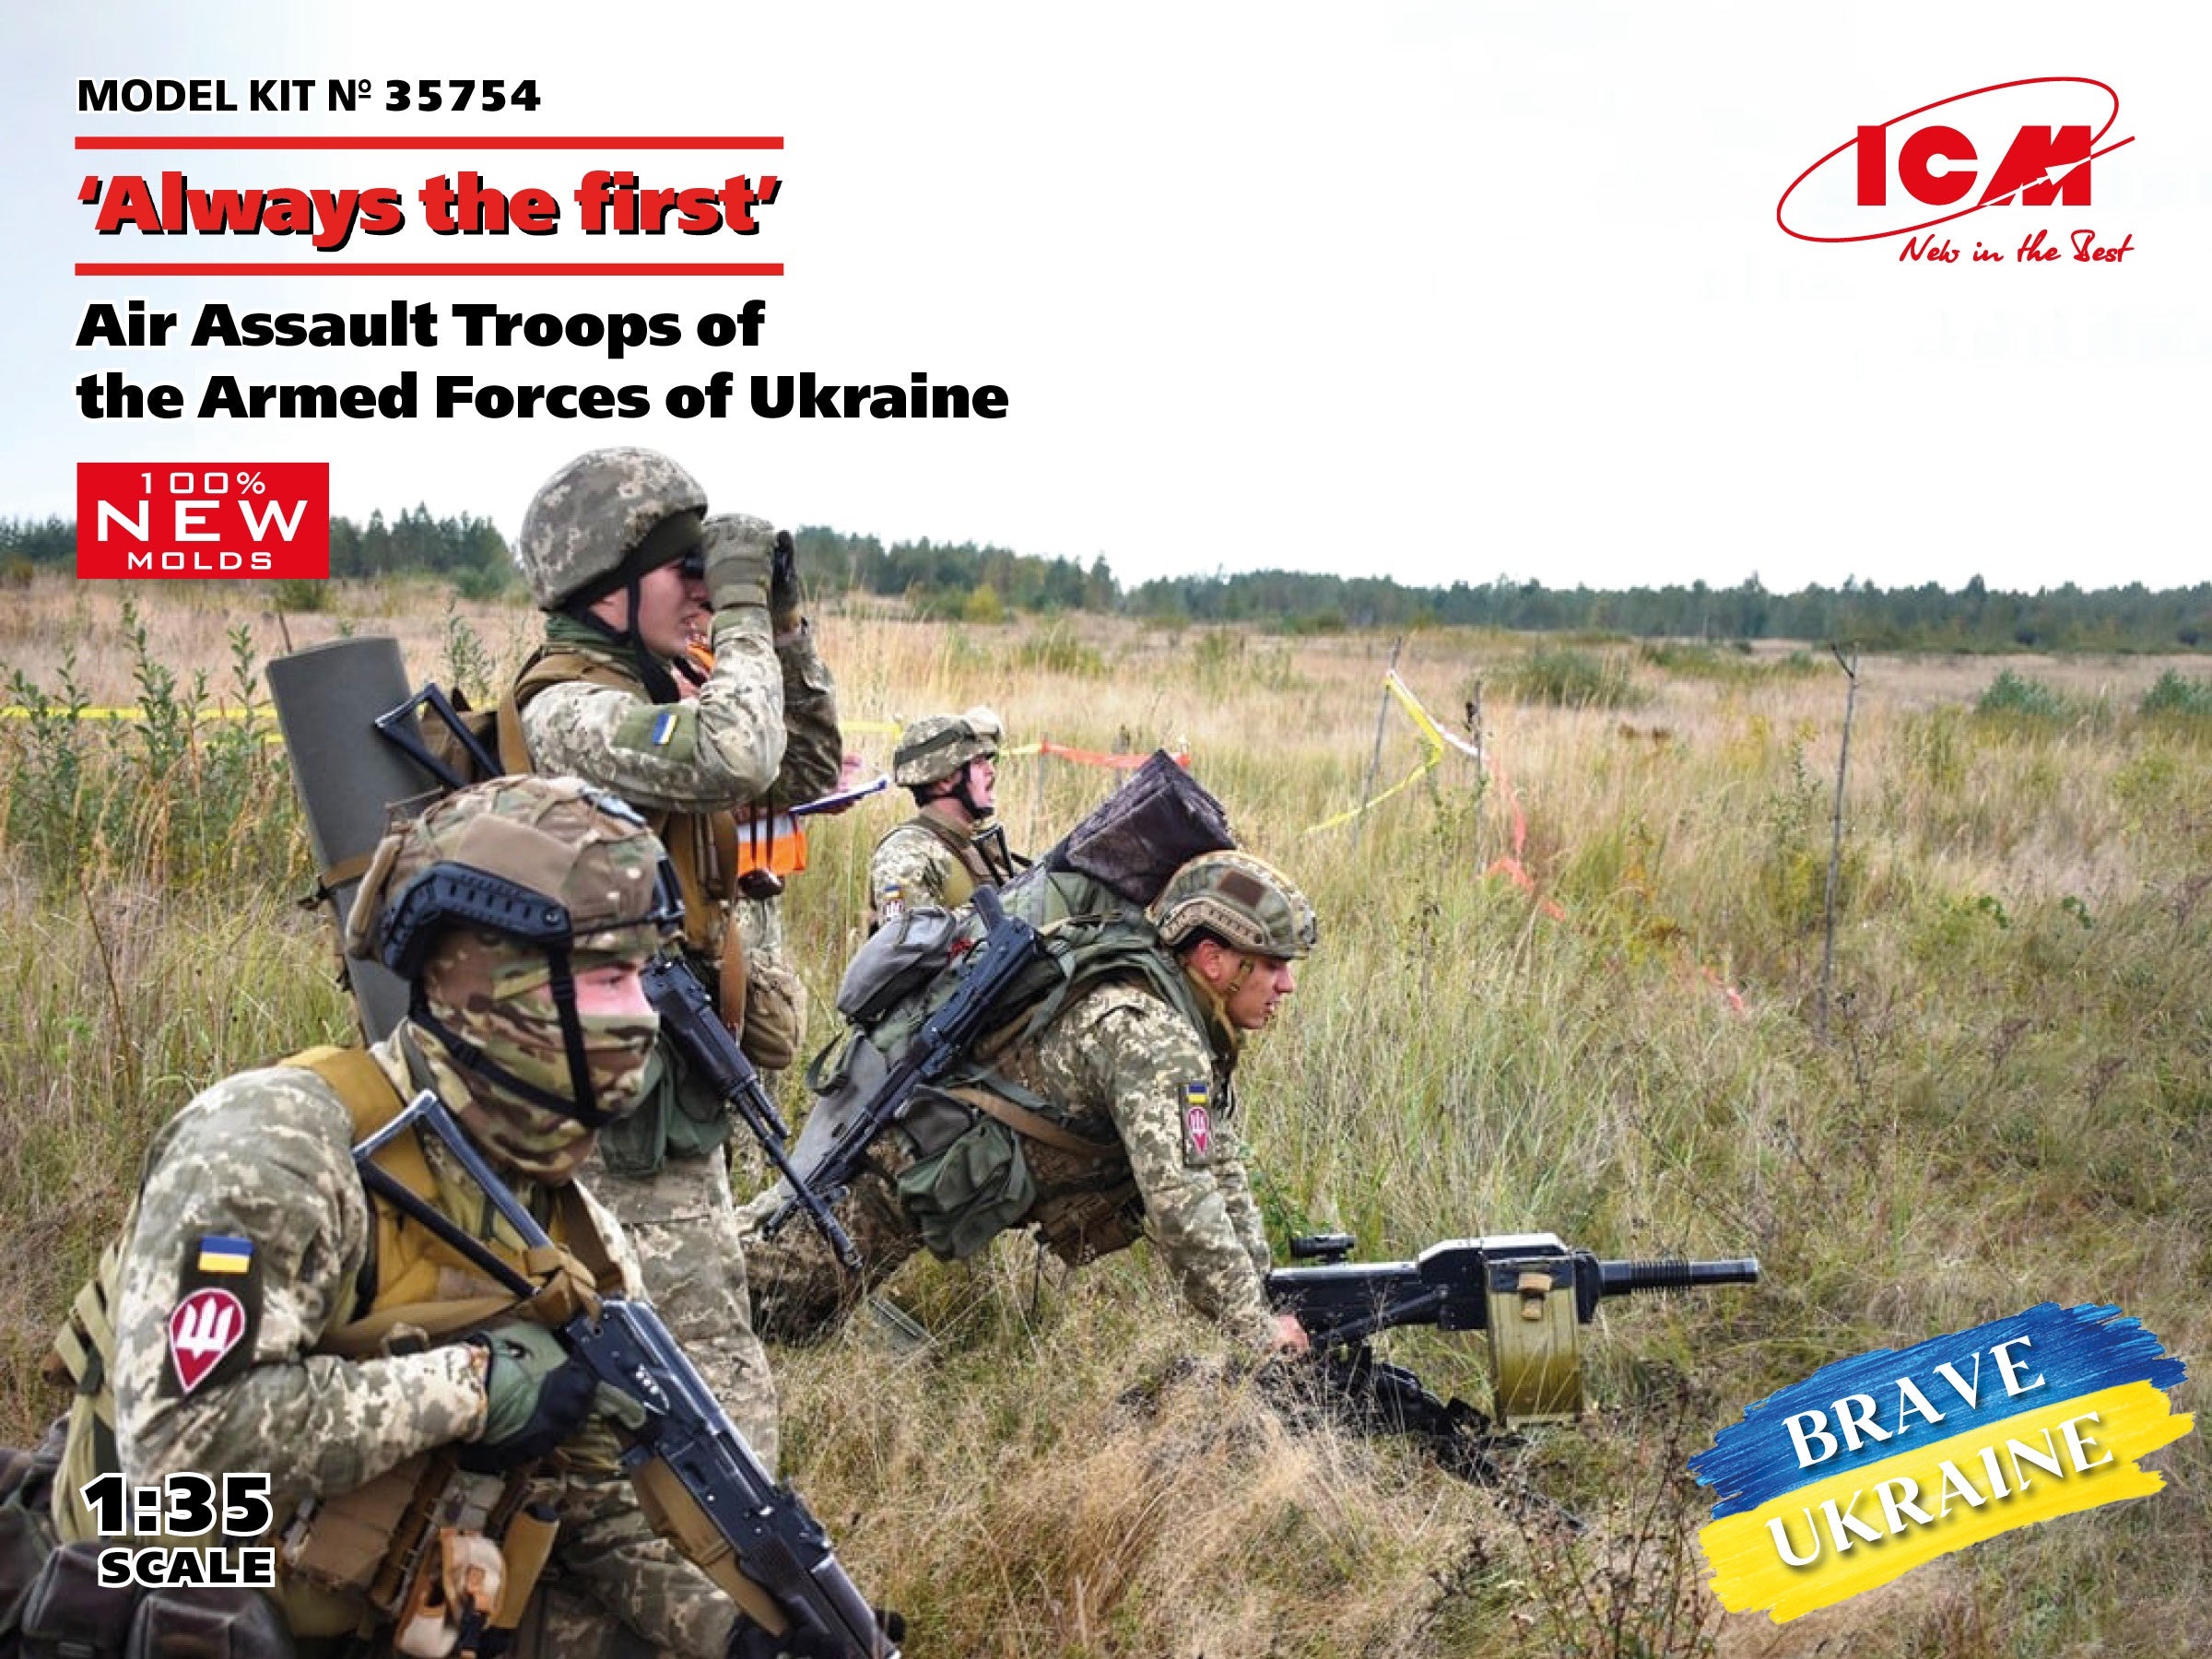 "Always the first" Air Assault Troops of the Armed Forces of Ukraine (4 figures) (100% new molds) 1/35 #35754 by ICM